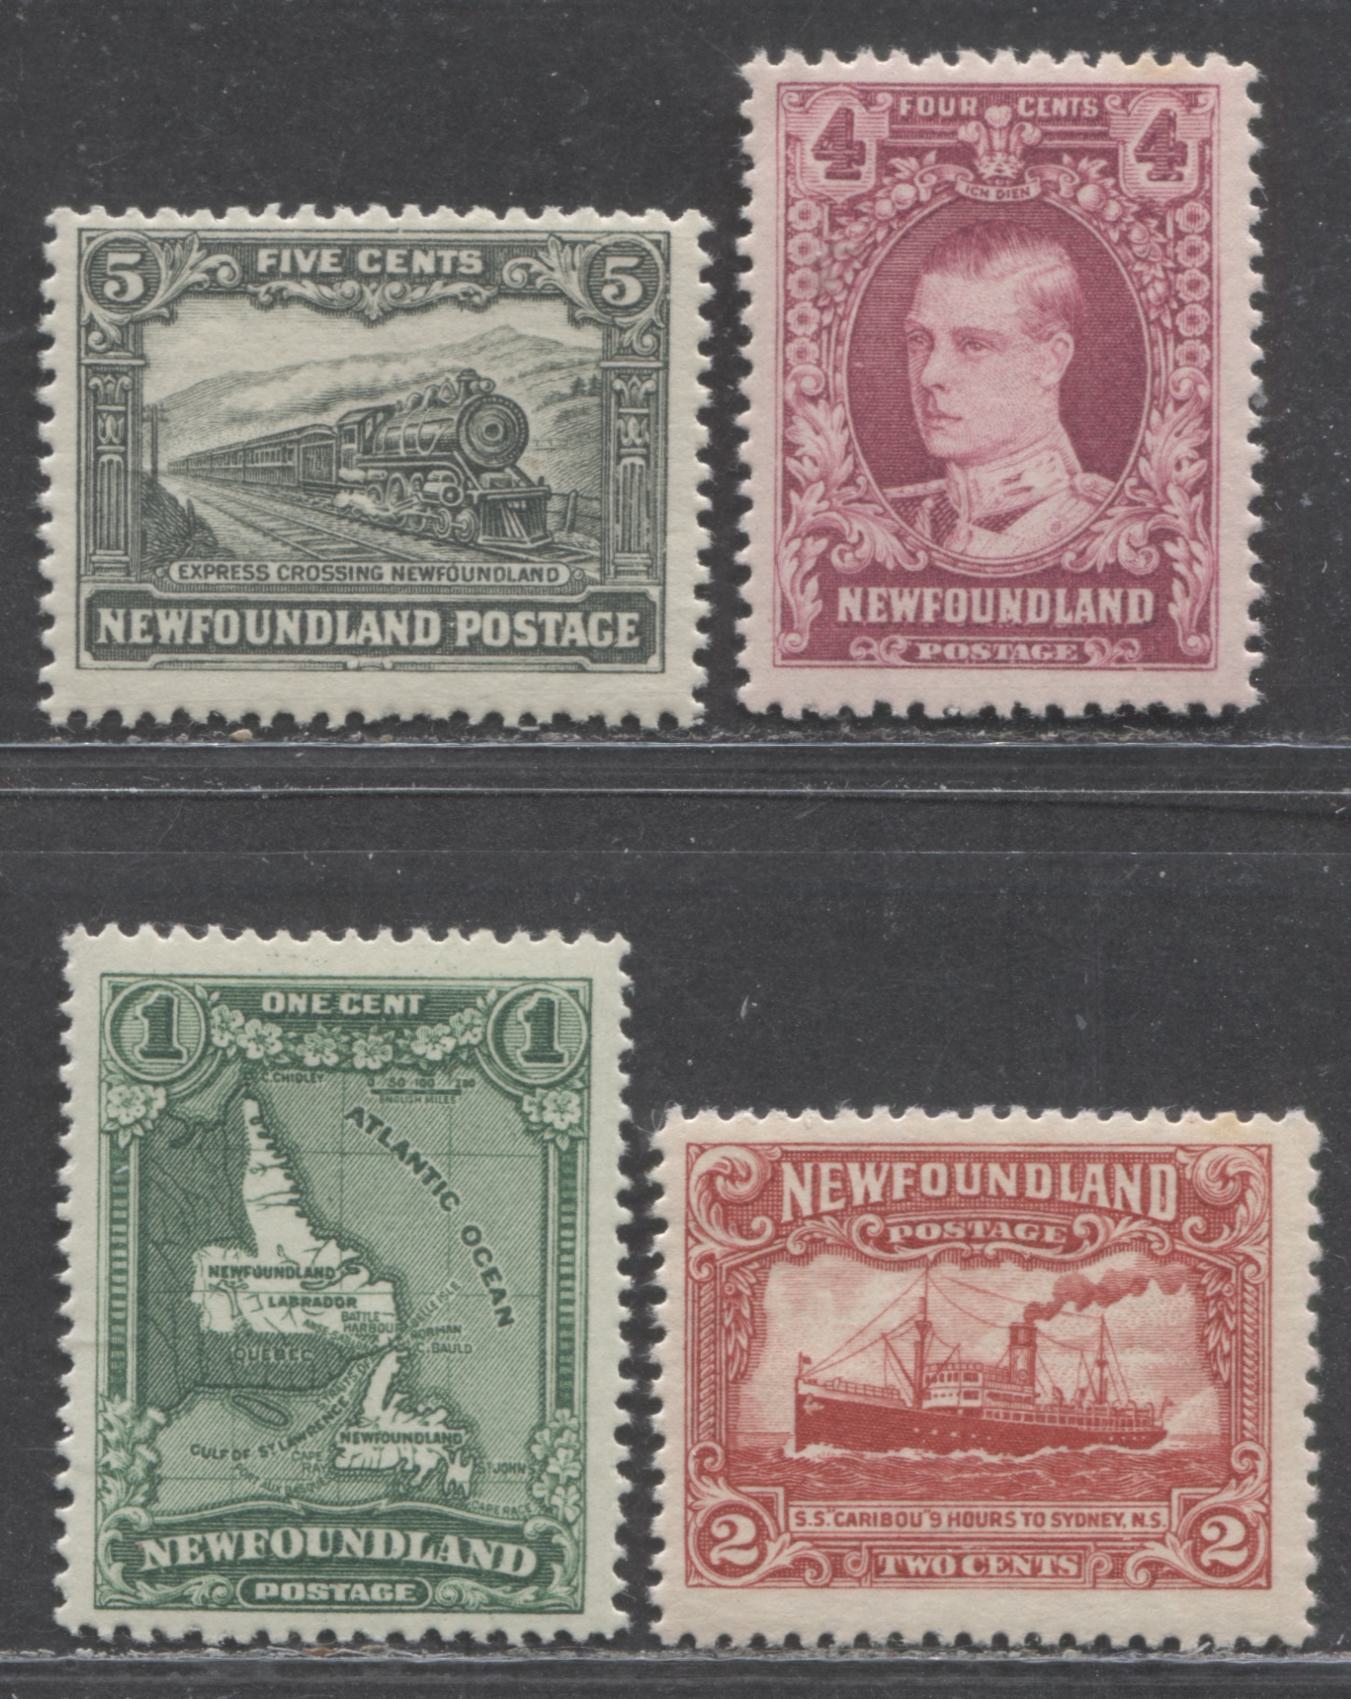 Lot 196 Newfoundland #163-164, 166-167 1c - 5c Green - Slate Green Map Of Newfoundland - Express Train, 1929-1931 Re-Engraved Pictorial Issue, 4 FOG Singles, Line Perfs 14, 14 x 13.6, 13.6 x 13.9 & 13.8